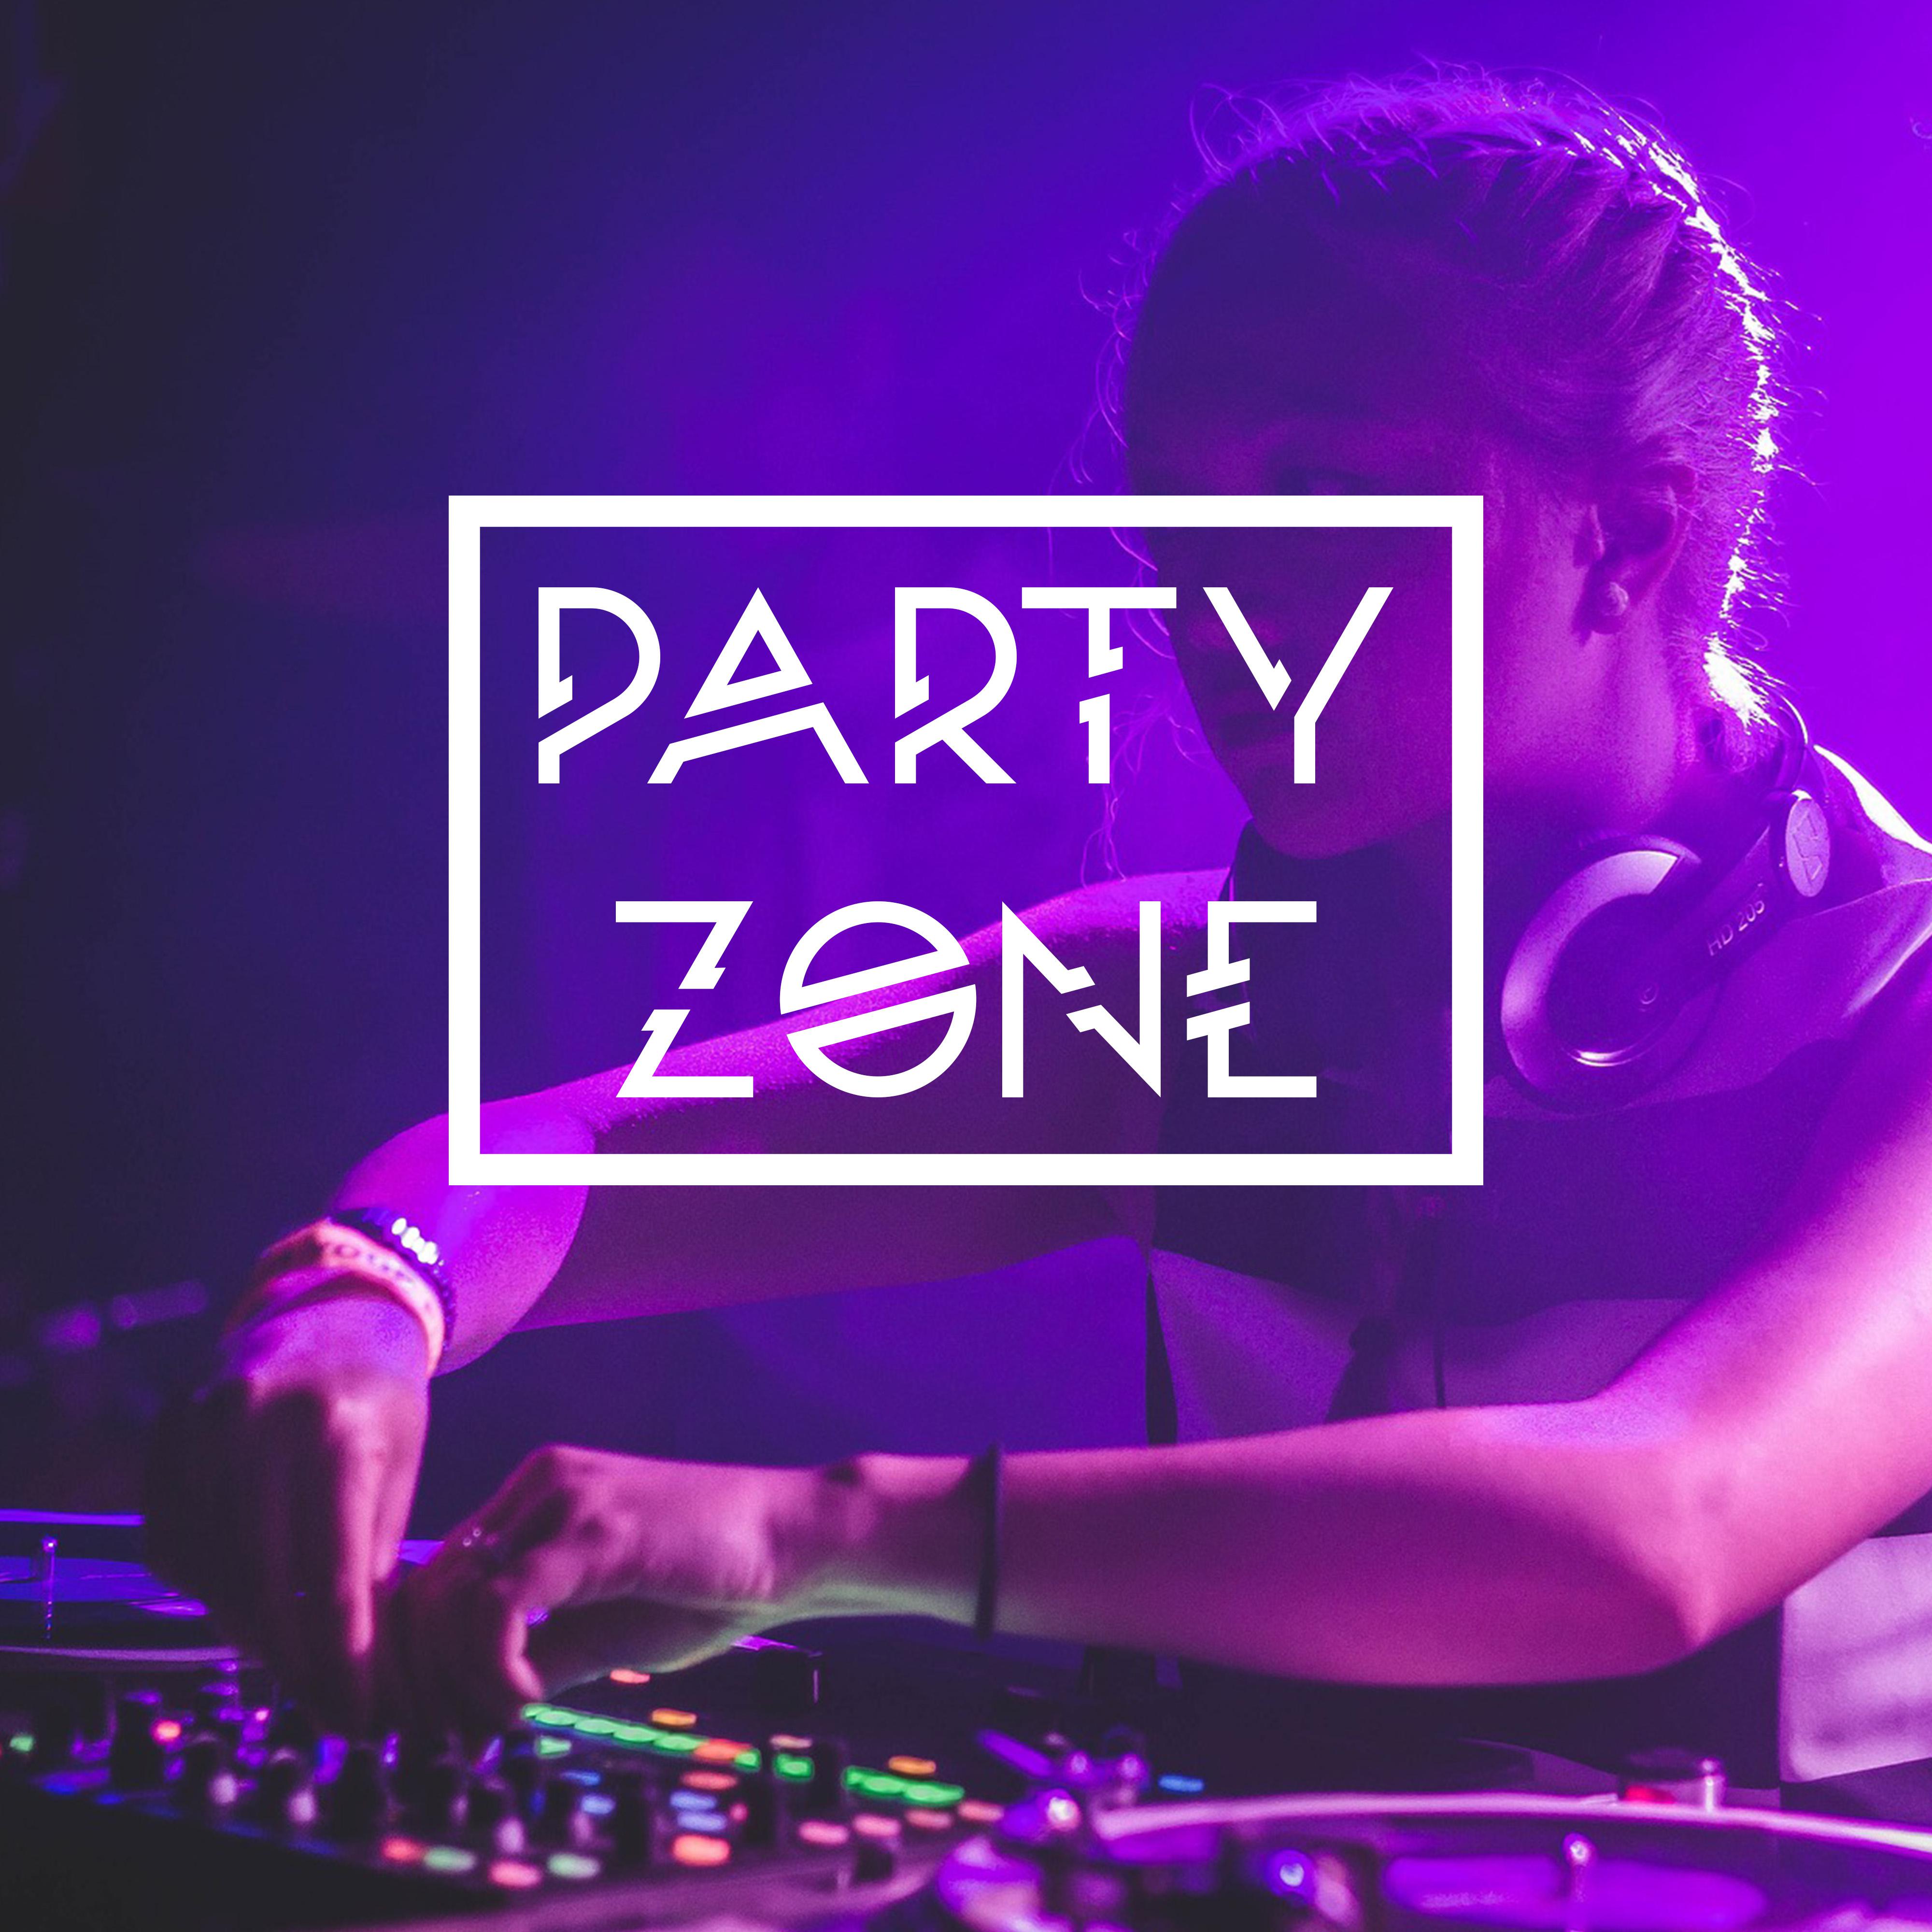 Party Zone - Disco Summer, Summer Time Dance, Music for a Holiday Relaxing, Wonderful Sounds Islands, Get Carried away Fun